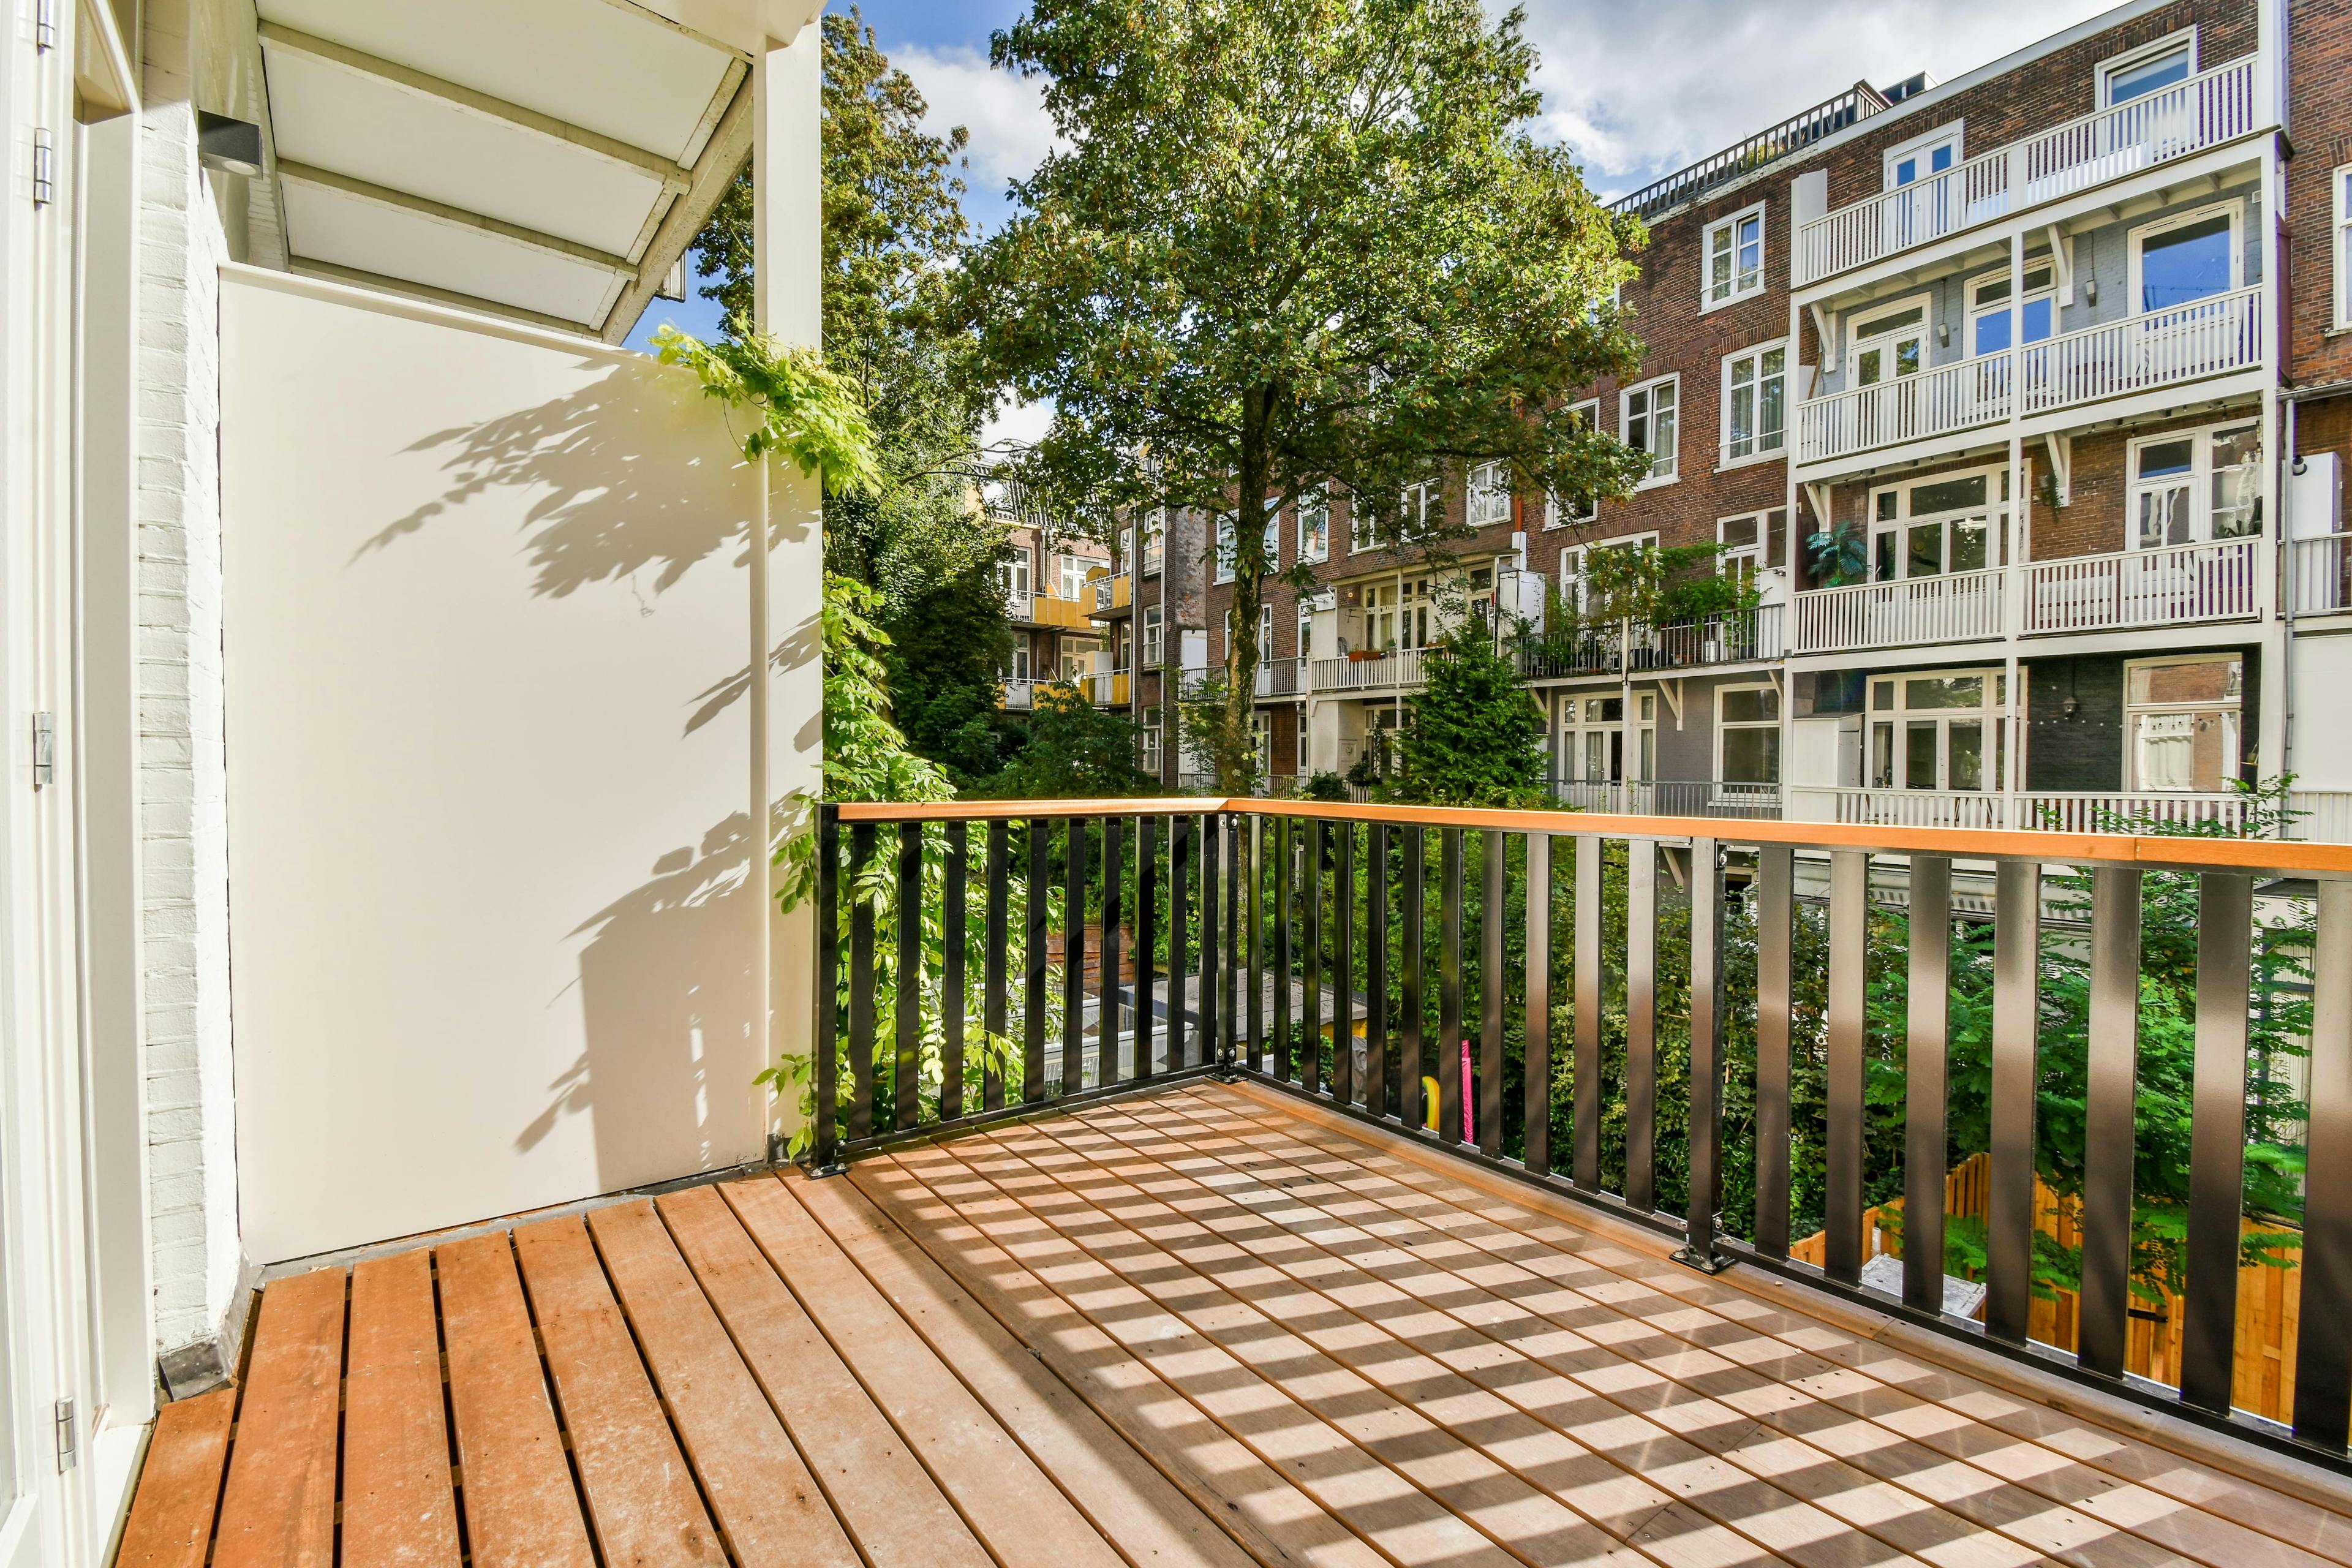 A small apartment balcony that can be become your small outdoor oasis.